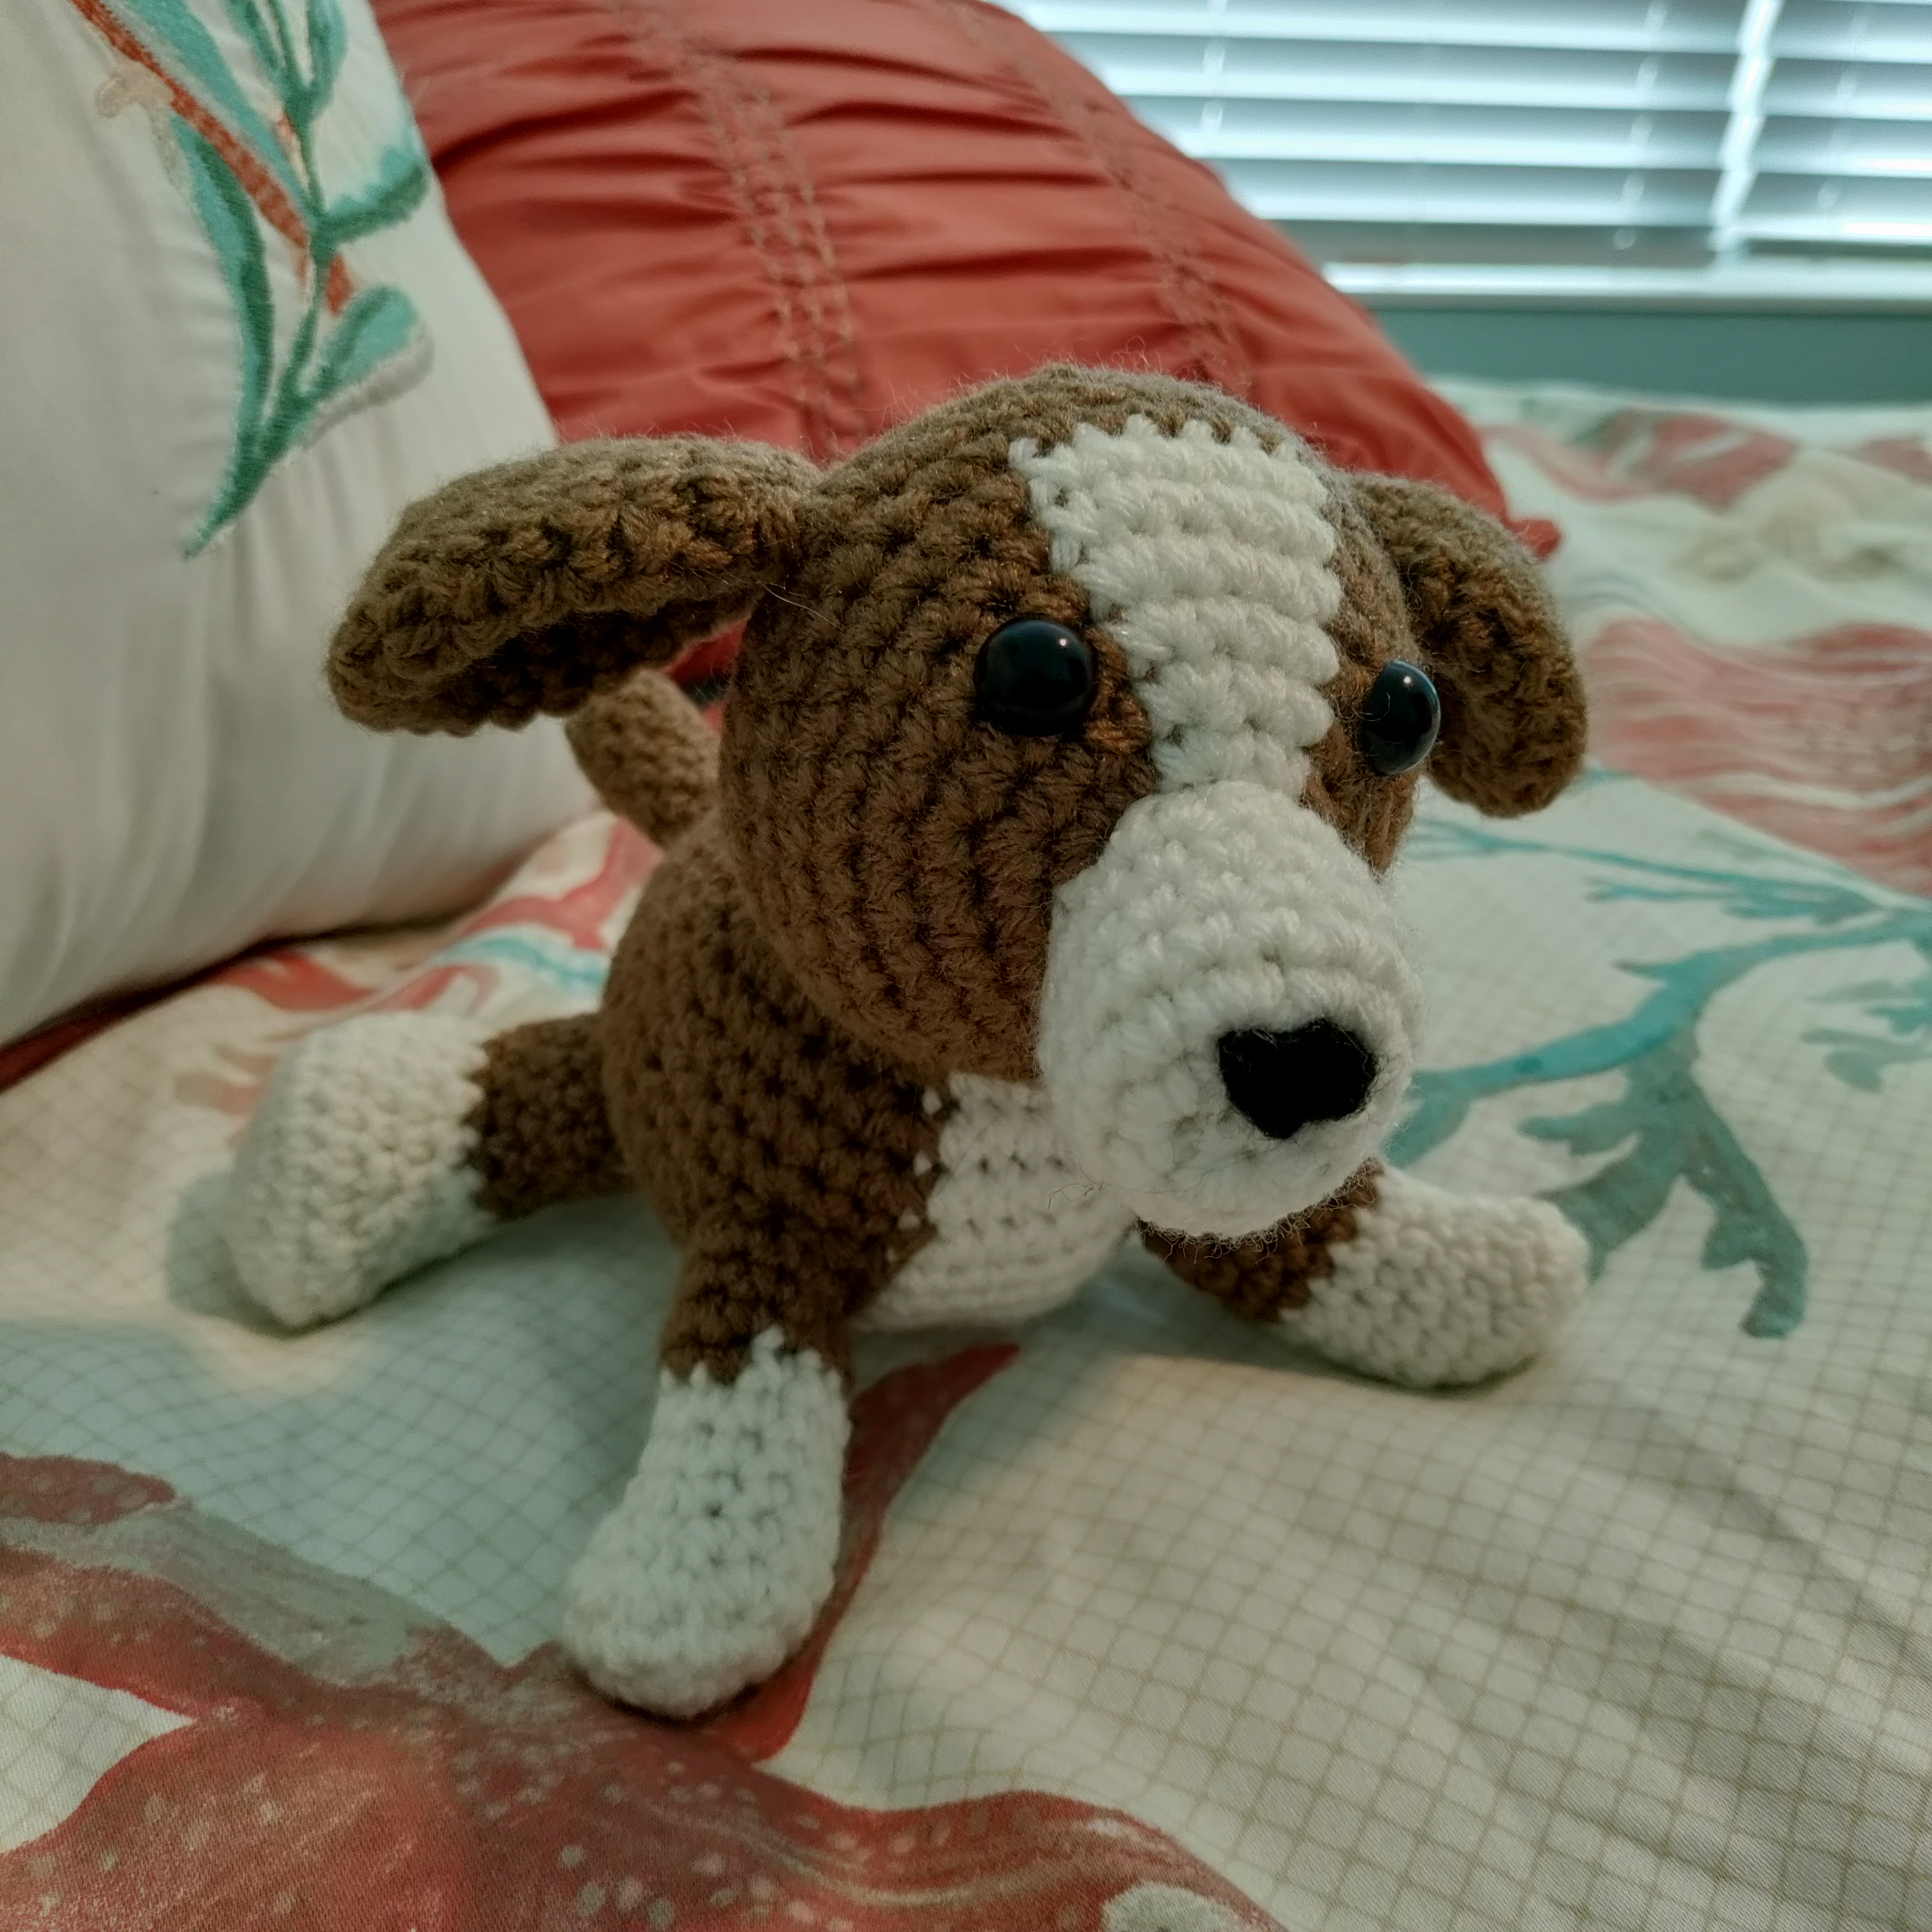 a crocheted brown and white beagle on a blue and coral themed bedspread